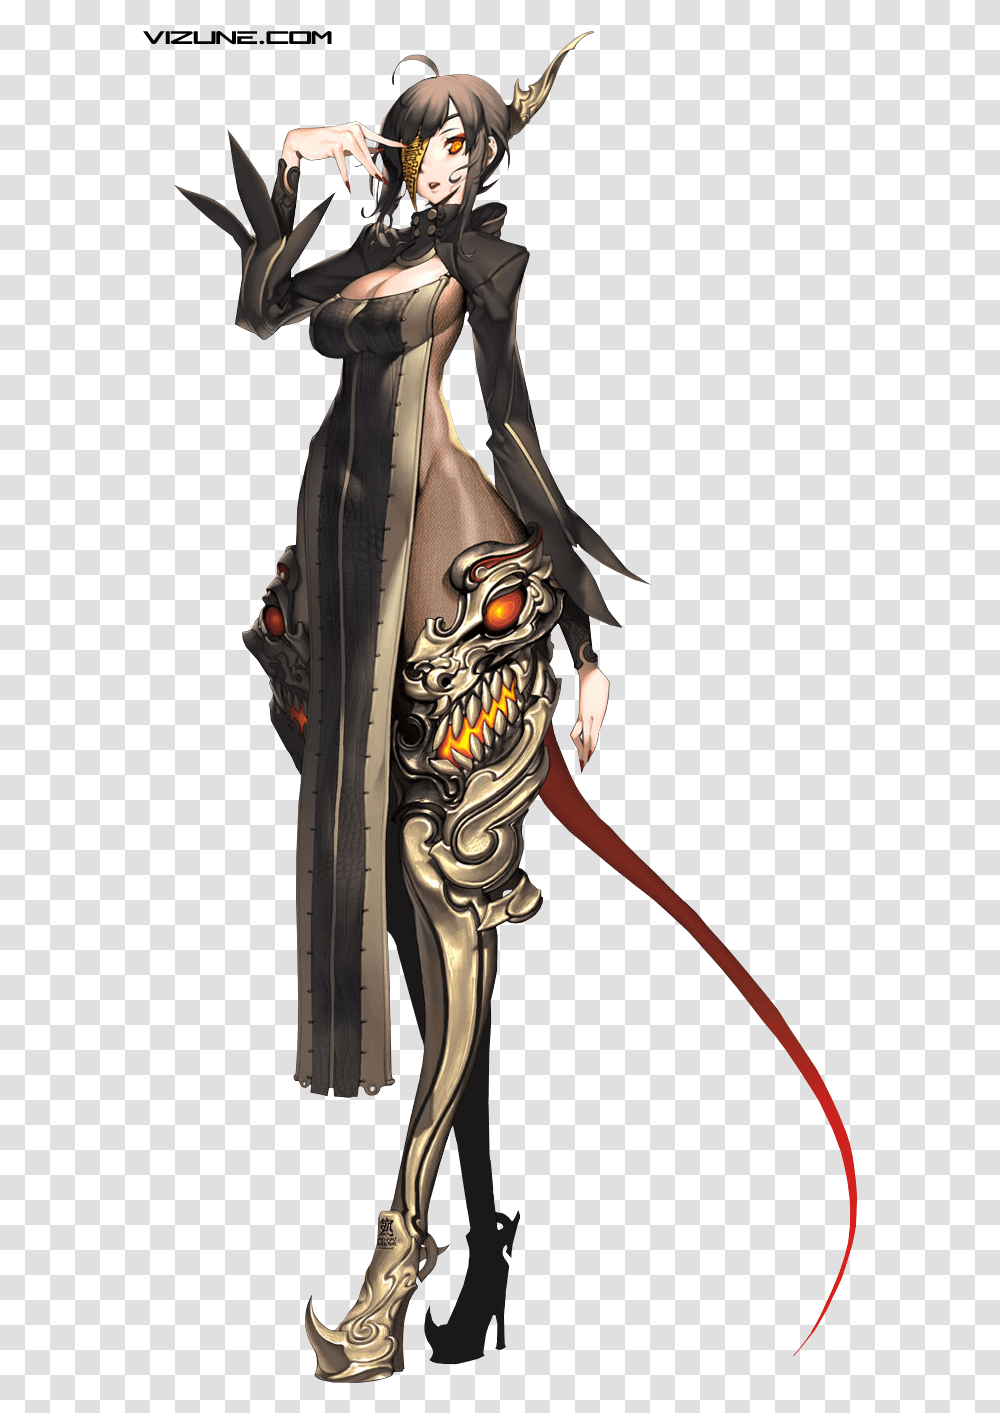 Blade And Soul Nomad Outfit Mmd Blade And Soul, Architecture, Building, Emblem Transparent Png